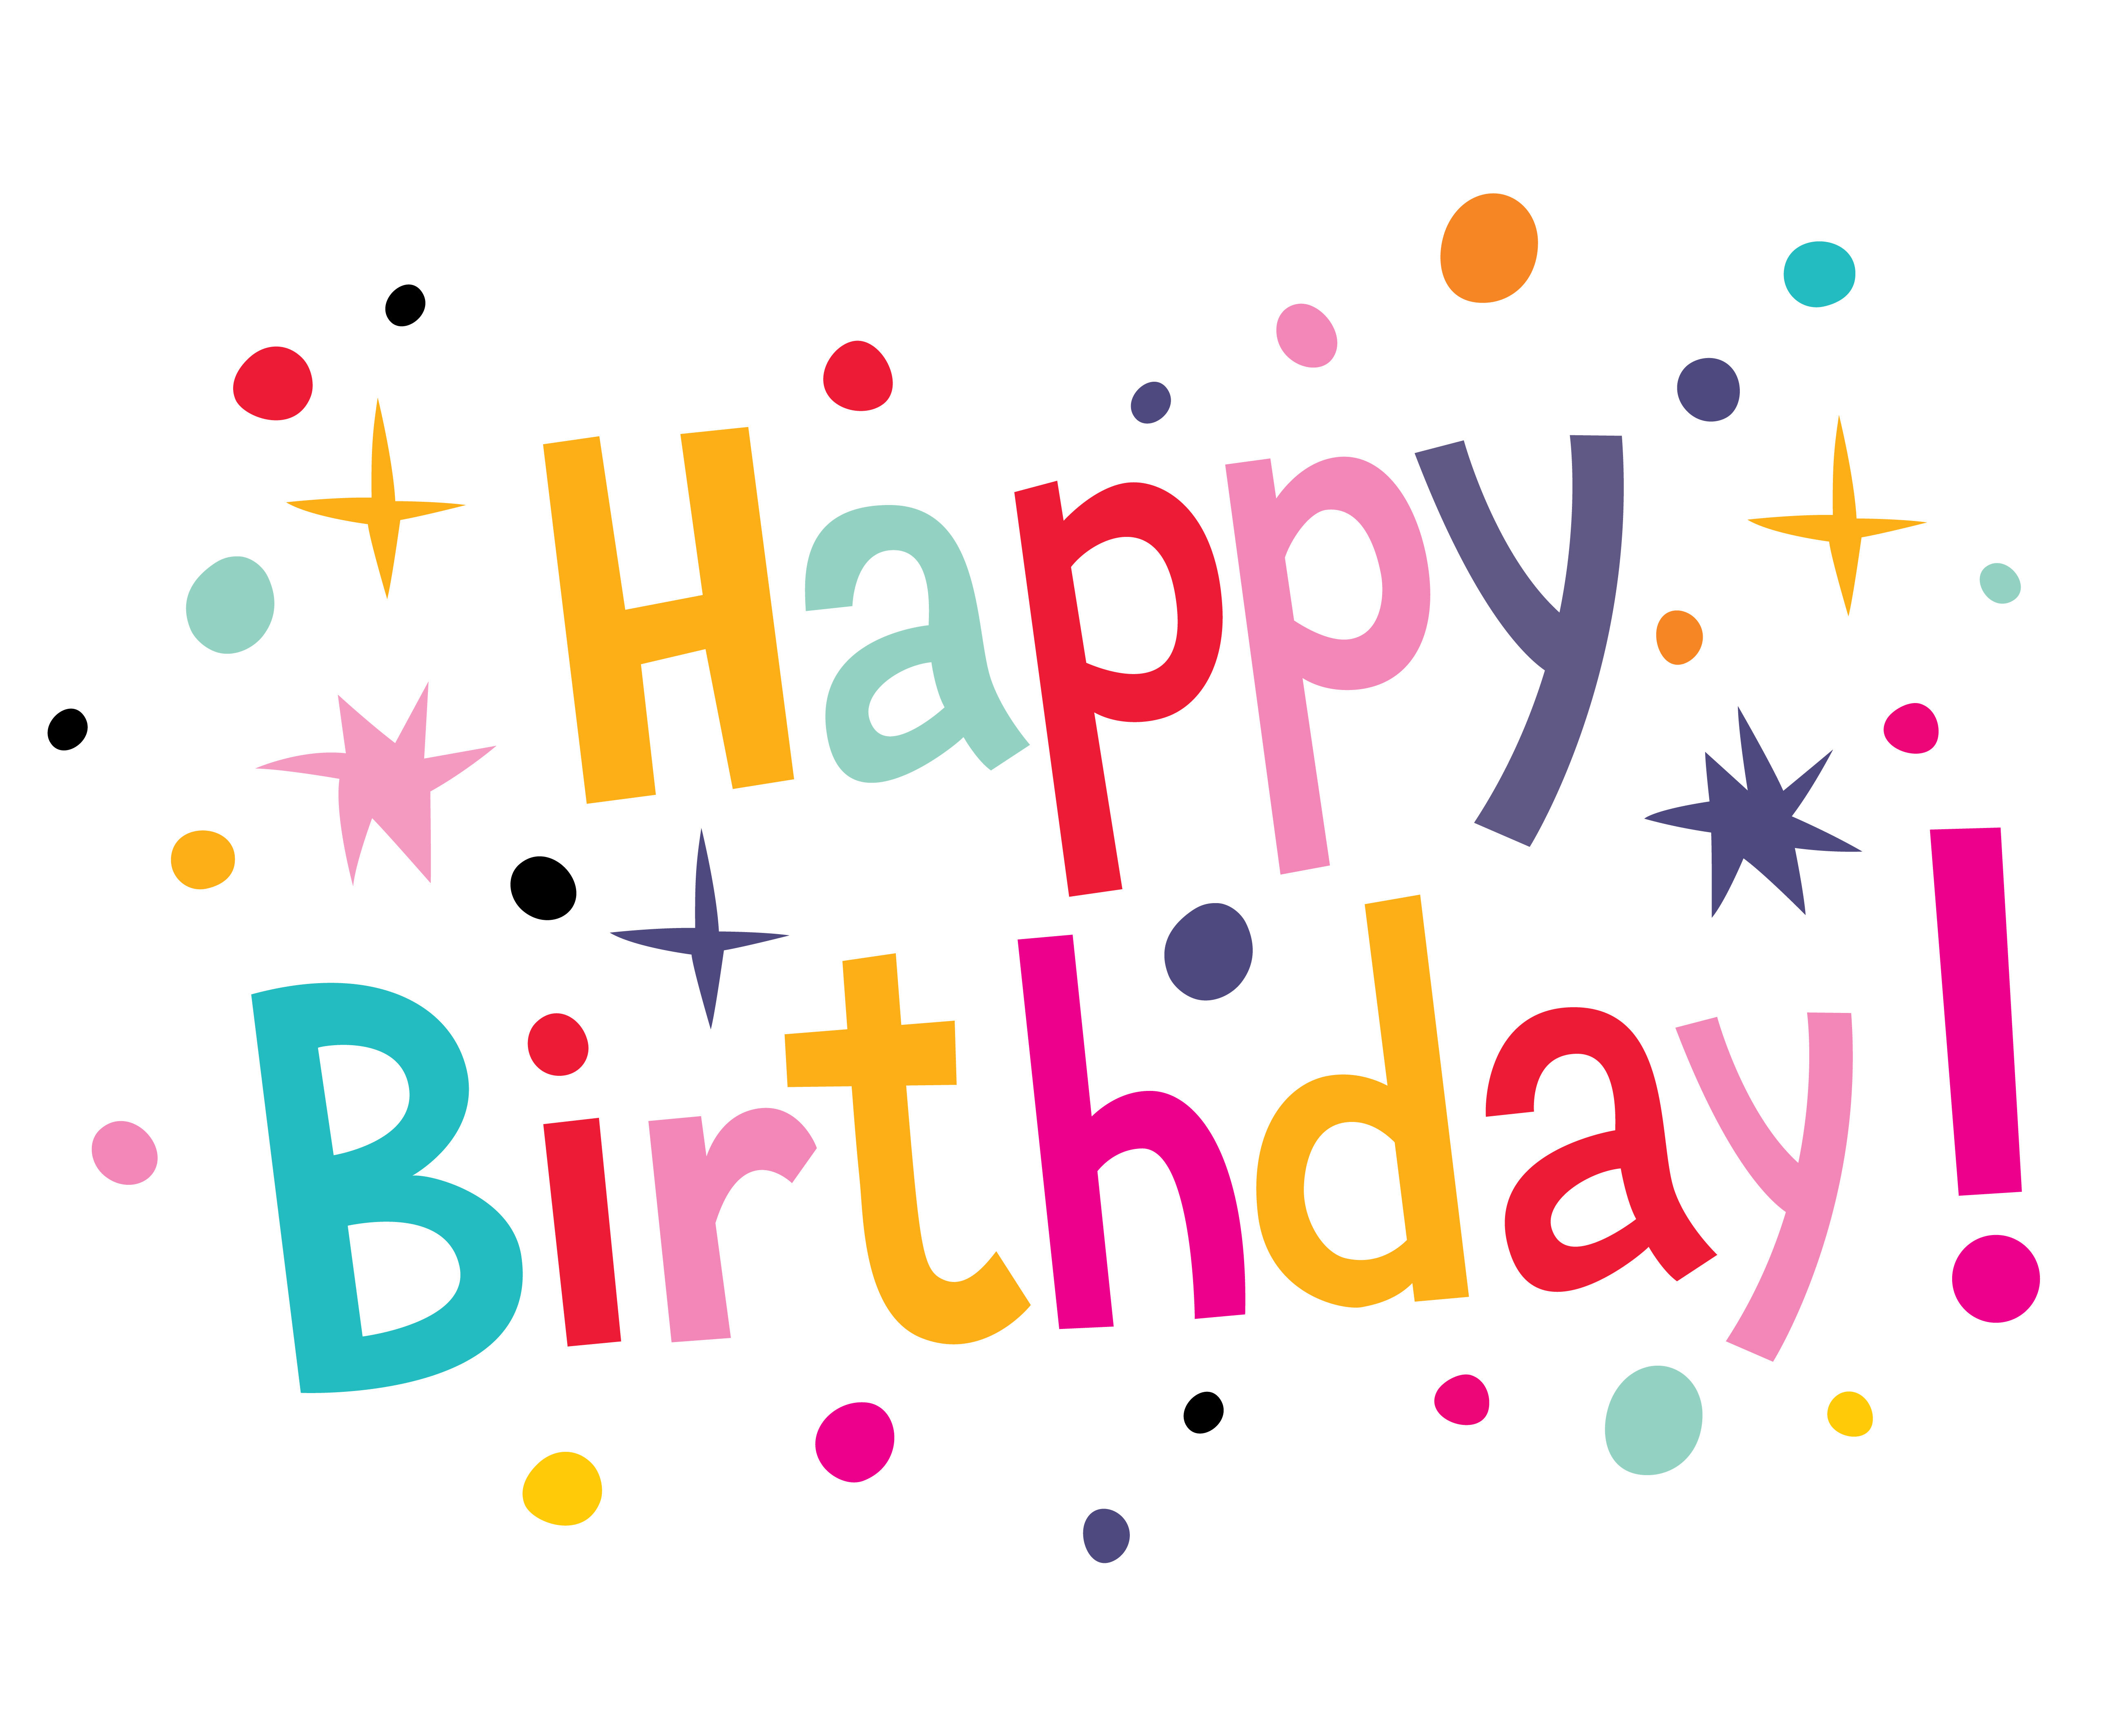 Happy Birthday Images Pictures, Photos, Images, and Pics for ...